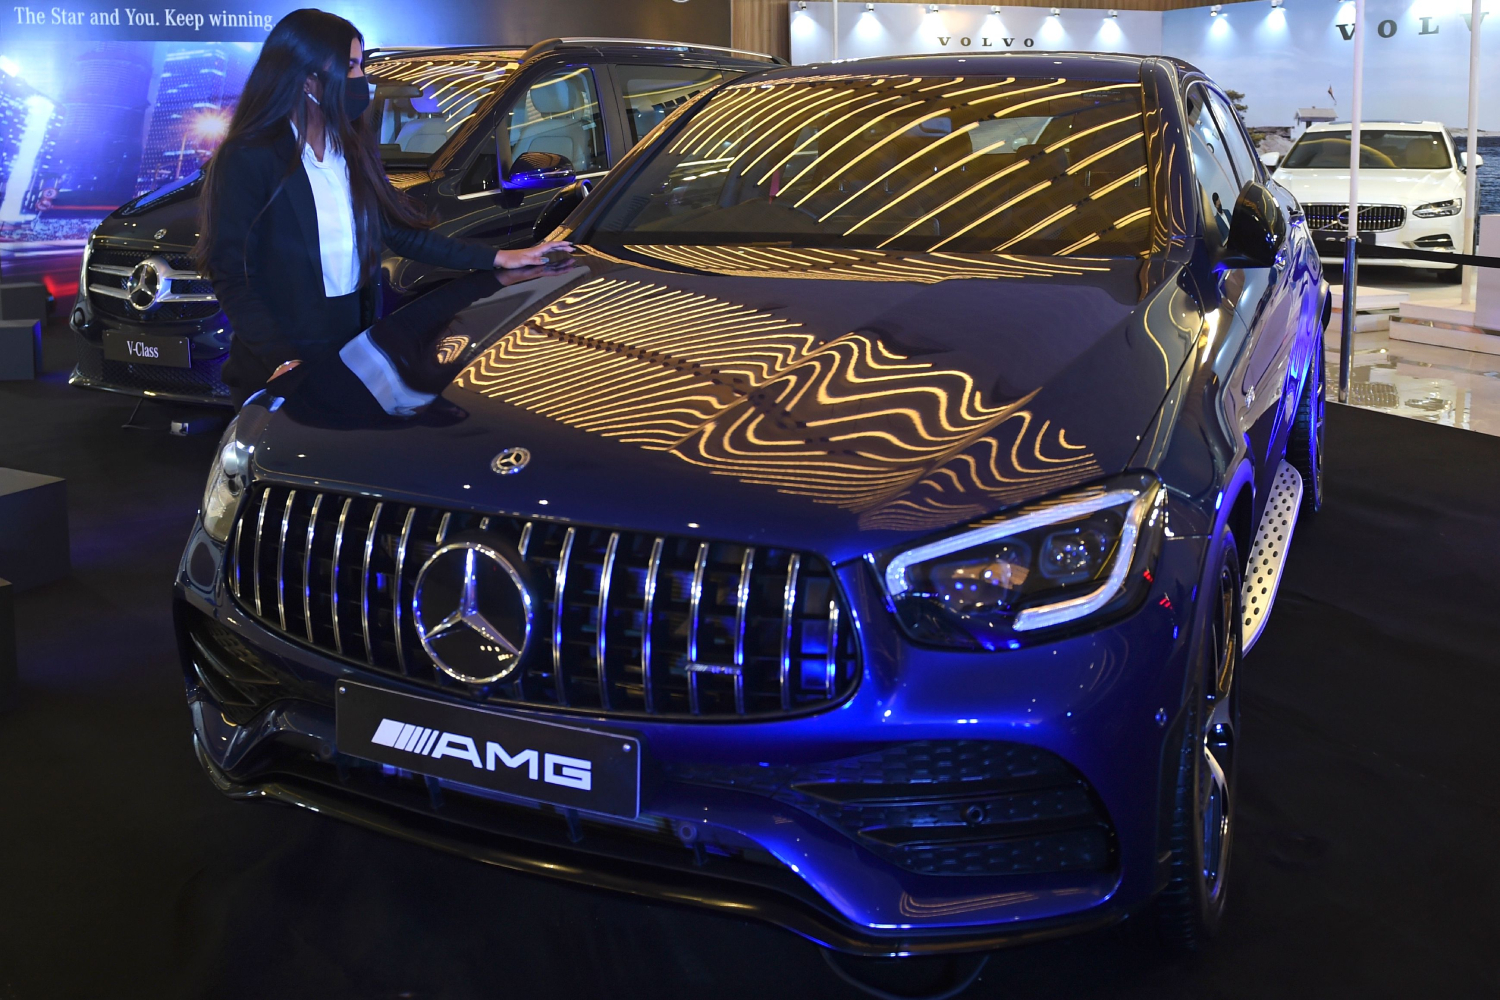 A new 2021 Mercedes-Benz on display at the Auto de Glam Expo